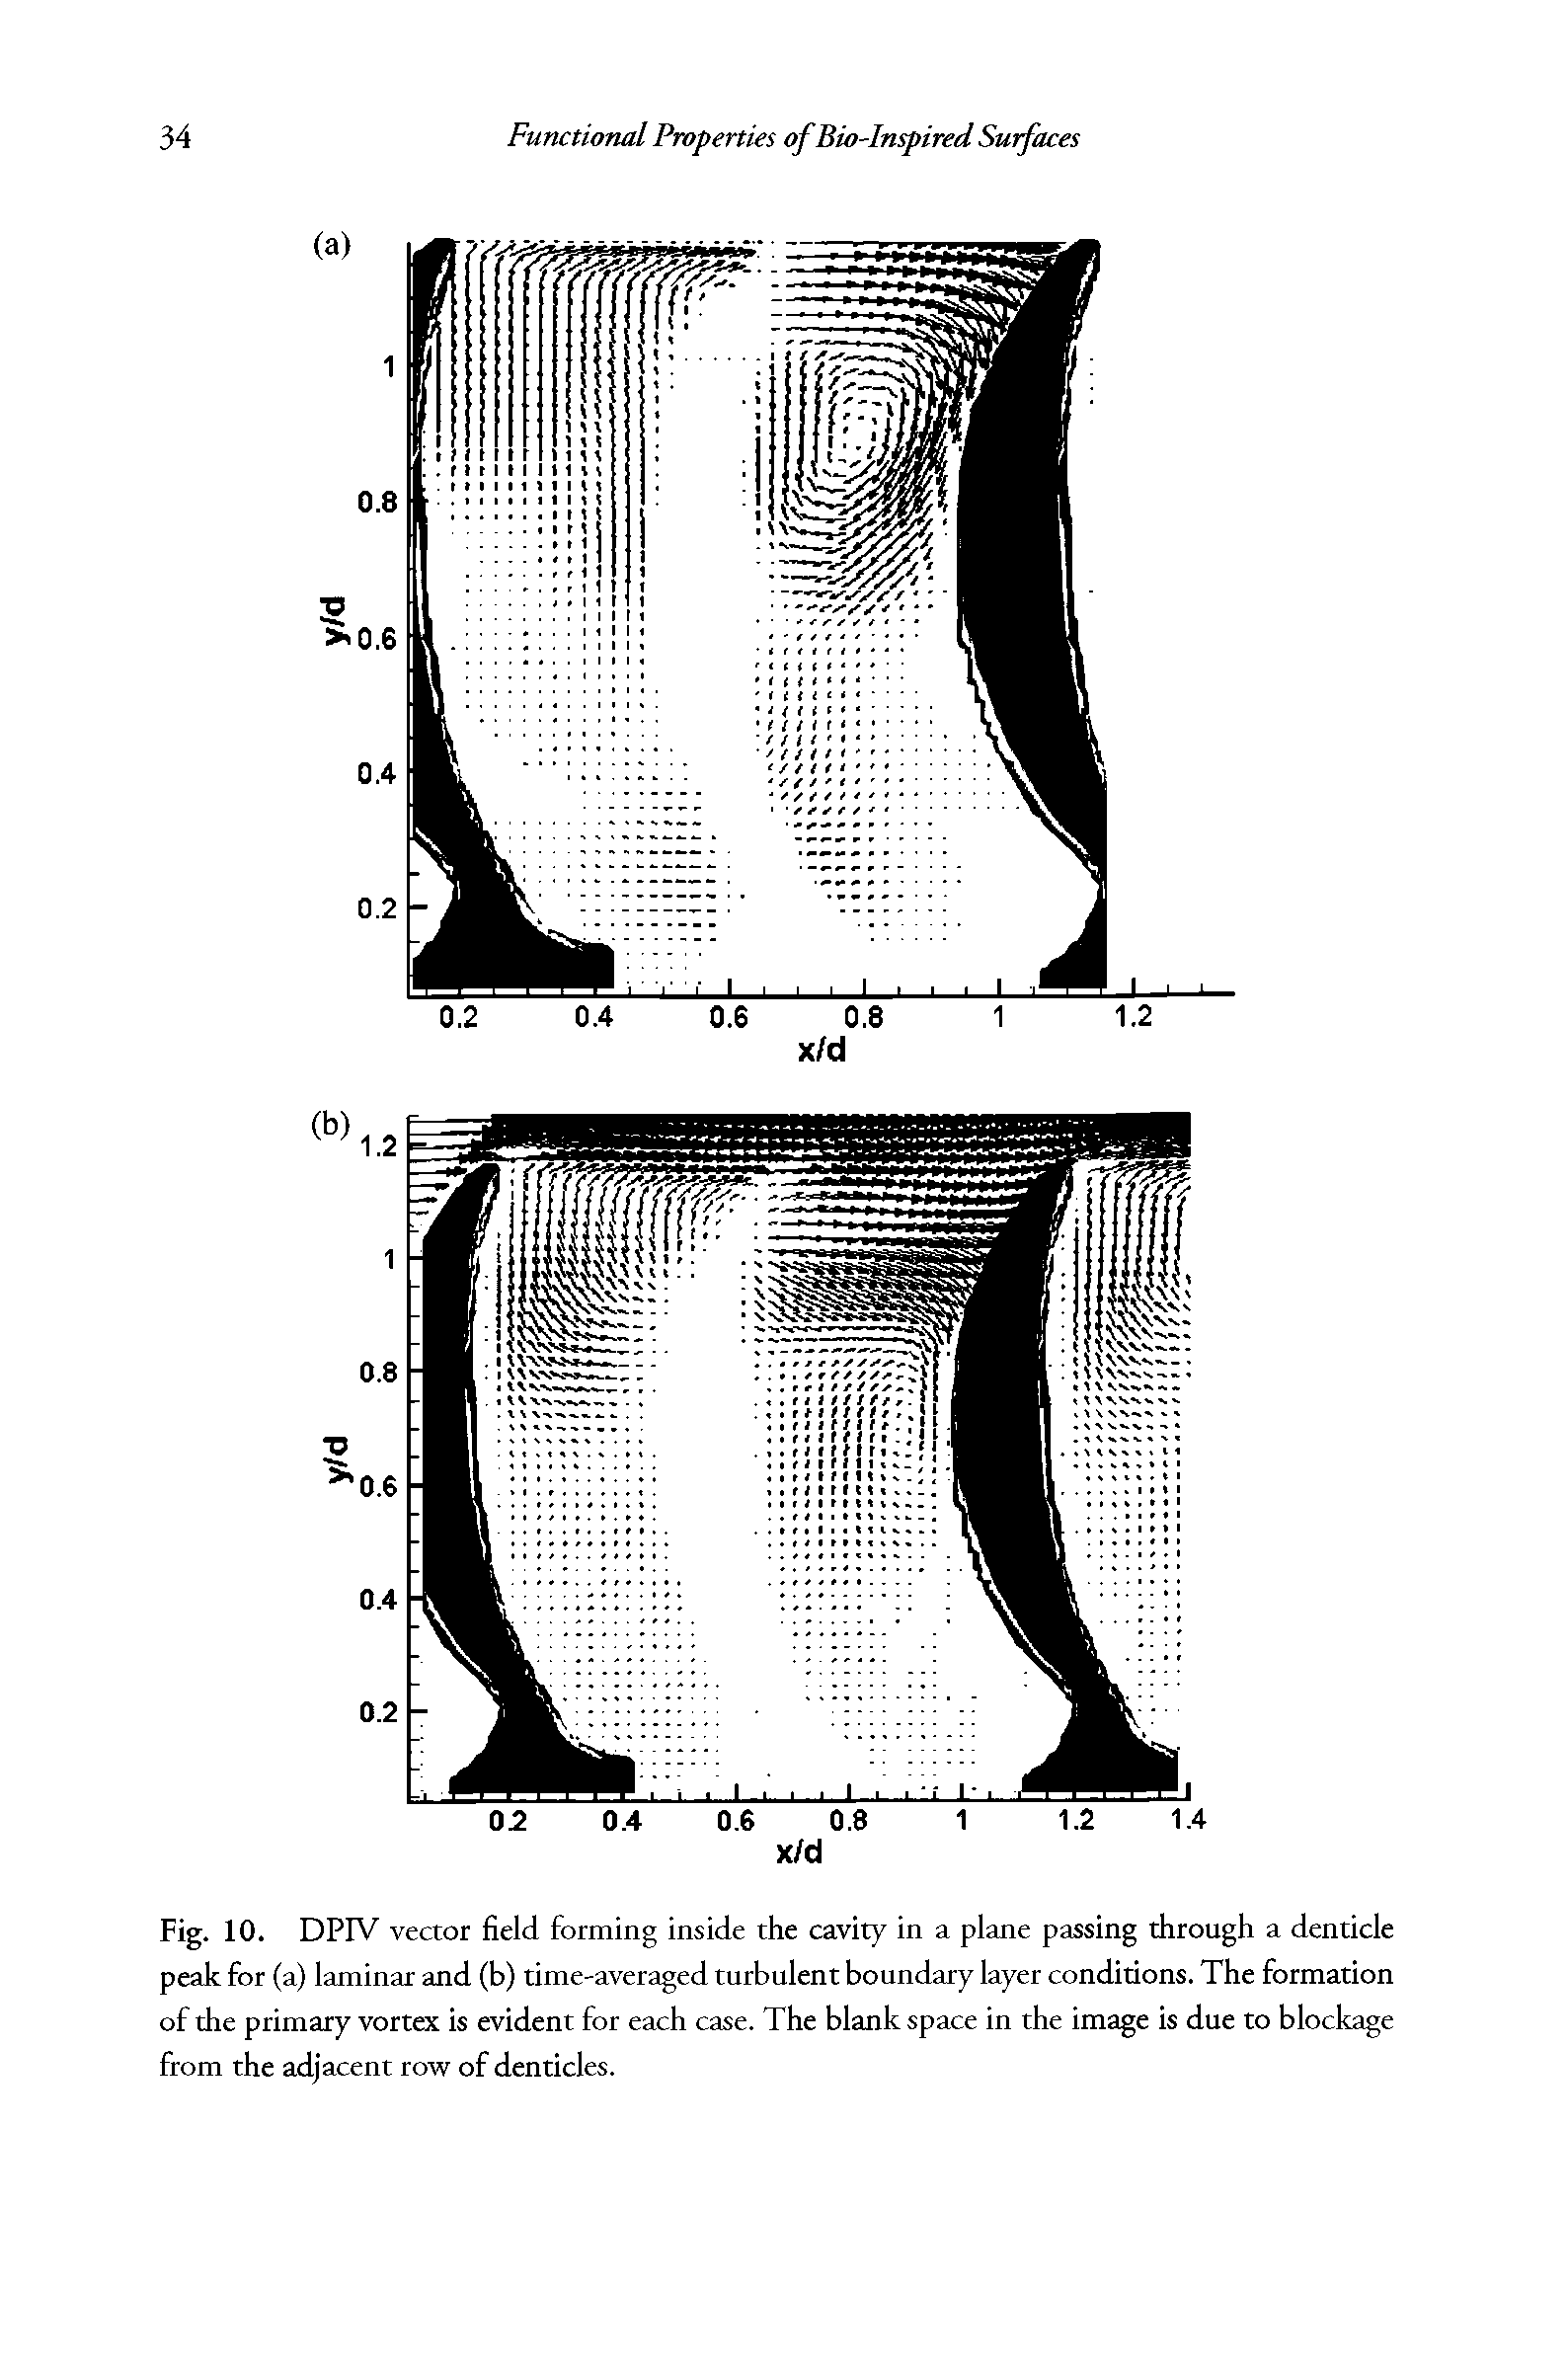 Fig. 10. DPIV vector field forming inside the cavity in a plane passing through a denticle peak for (a) laminar and (b) time-averaged turbulent boundary layer conditions. The formation of the primary vortex is evident for each case. The blank space in the image is due to blockage from the adjacent row of denticles.